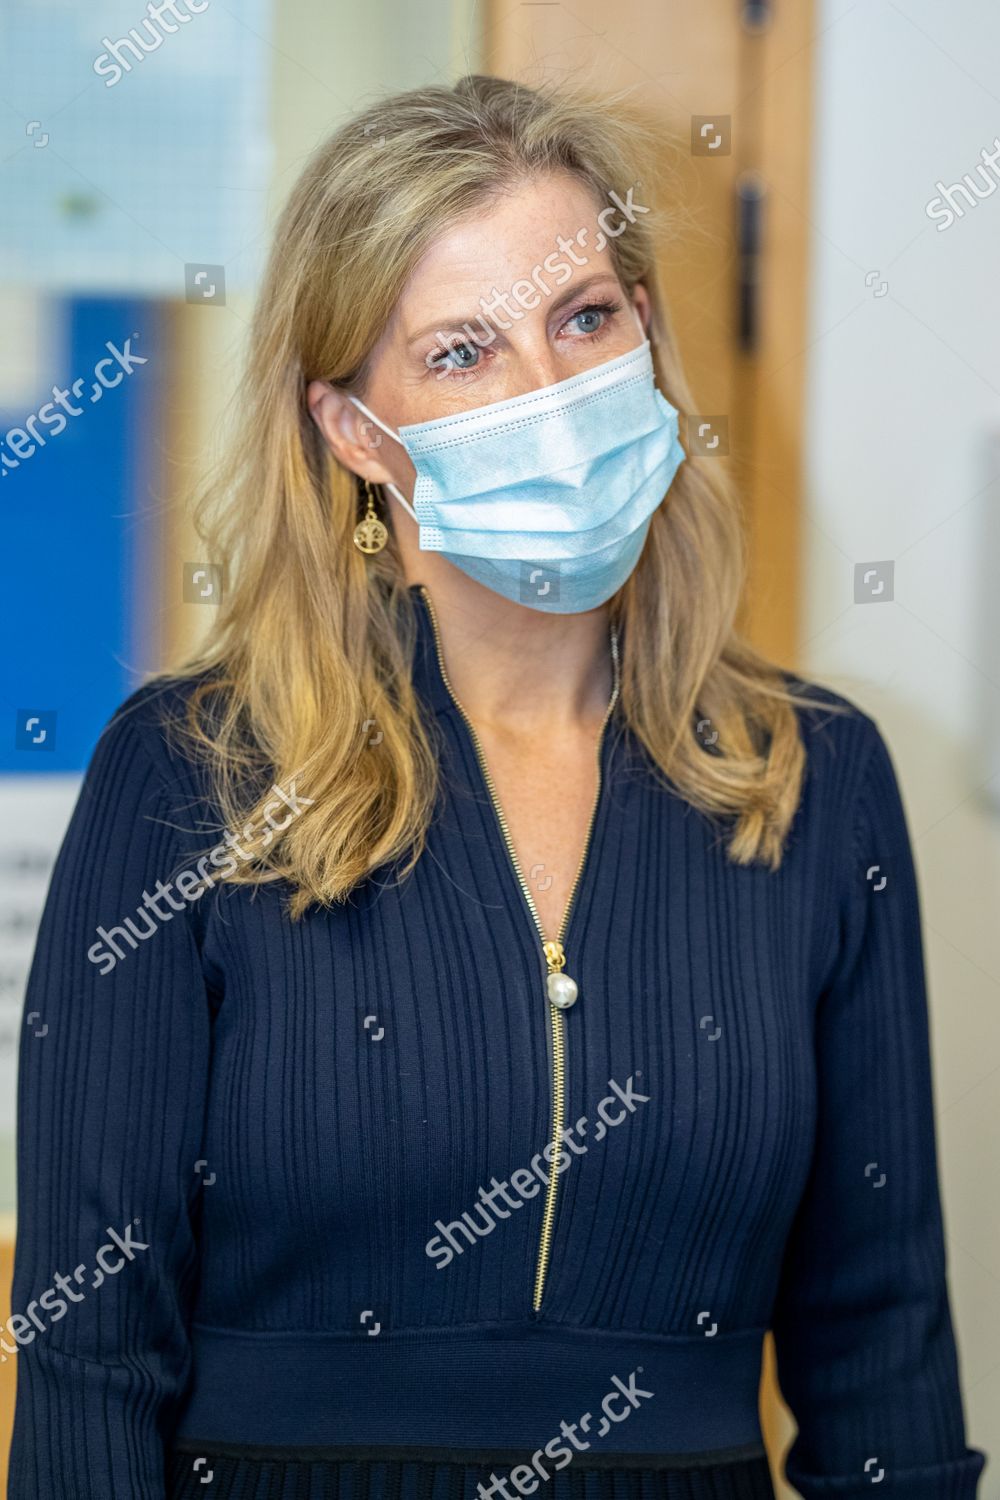 sophie-countess-of-wessex-and-prince-edward-visit-to-frimley-park-hospital-uk-shutterstock-editorial-11900147t.jpg